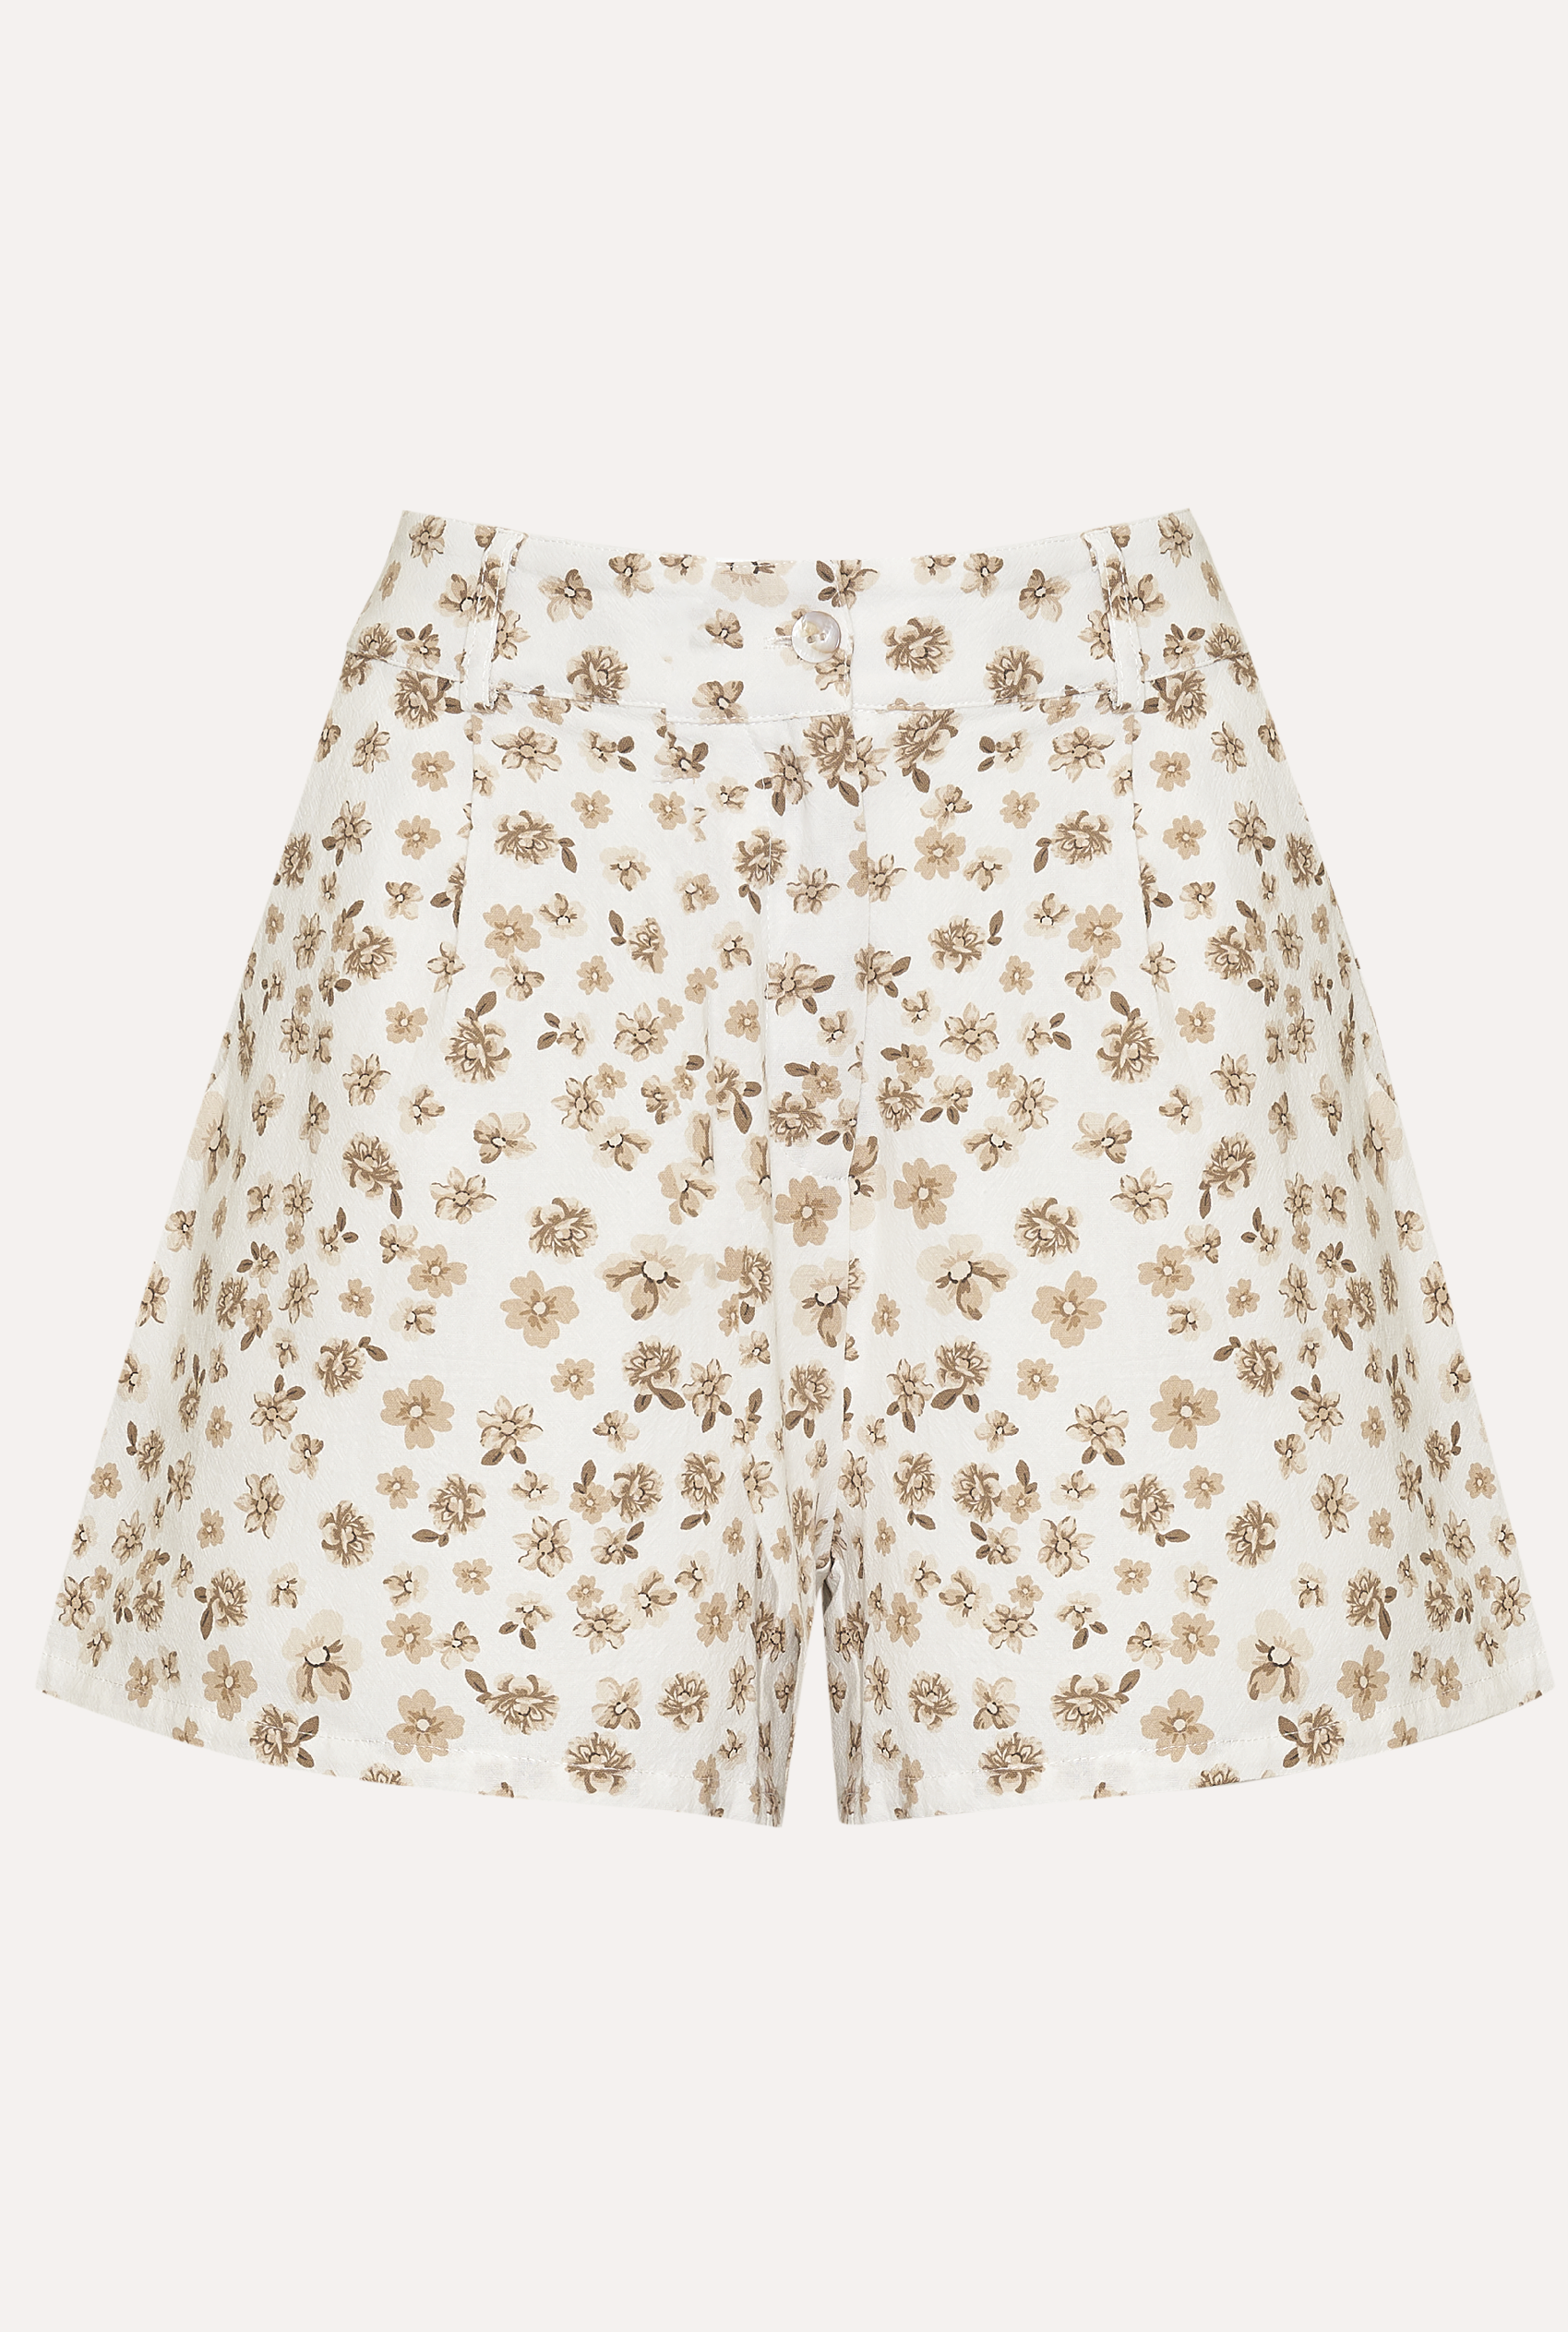 AVERIE SHORTS - BROWN FLORAL PRINT